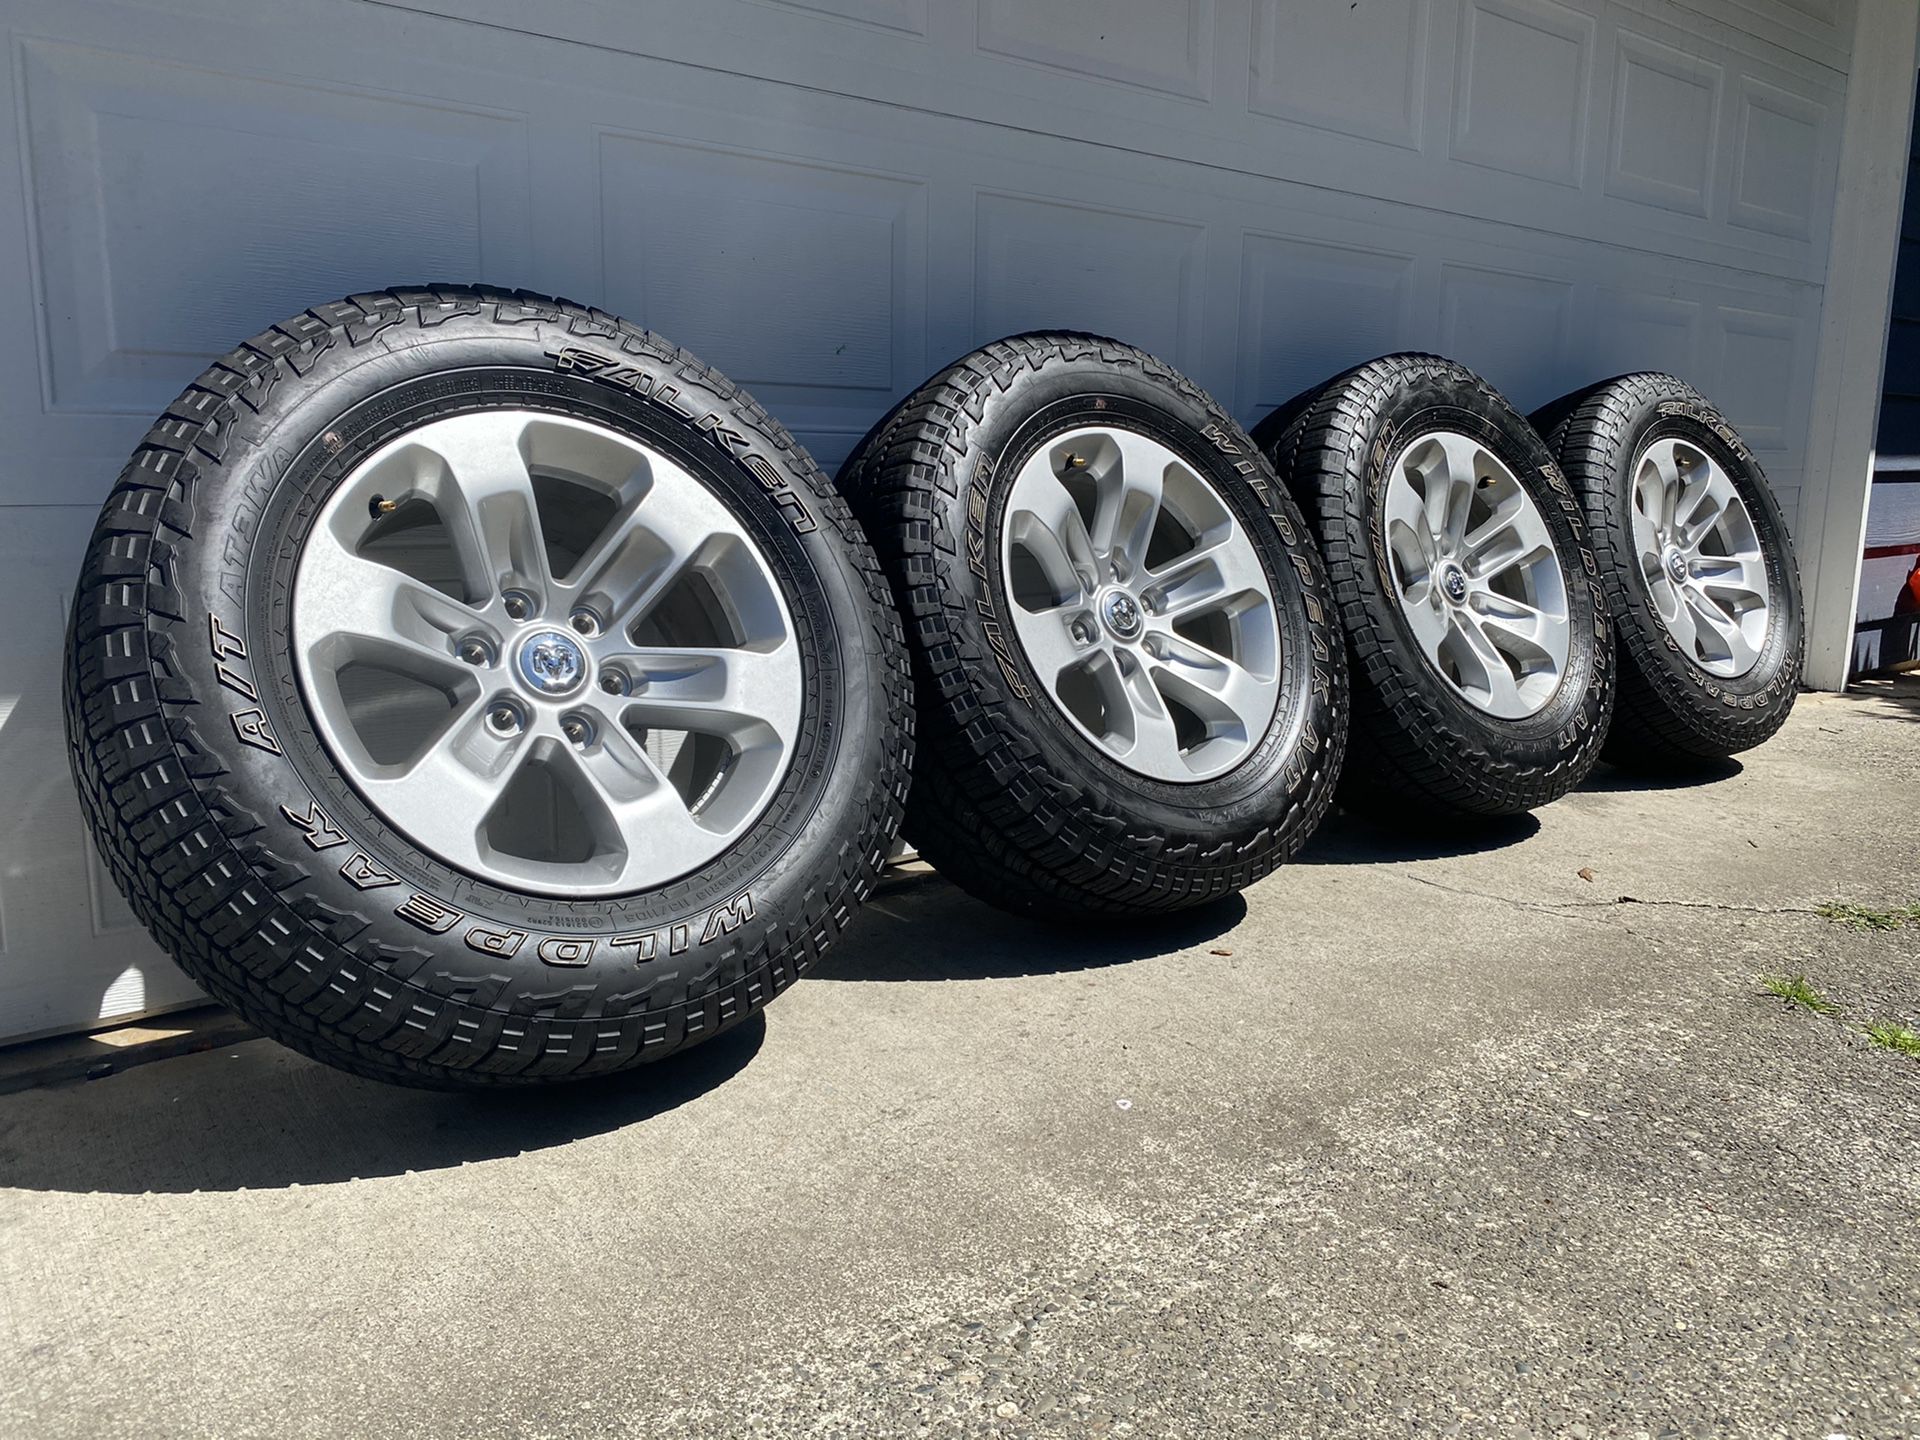 2020 Ram 1500 Wheels and tires